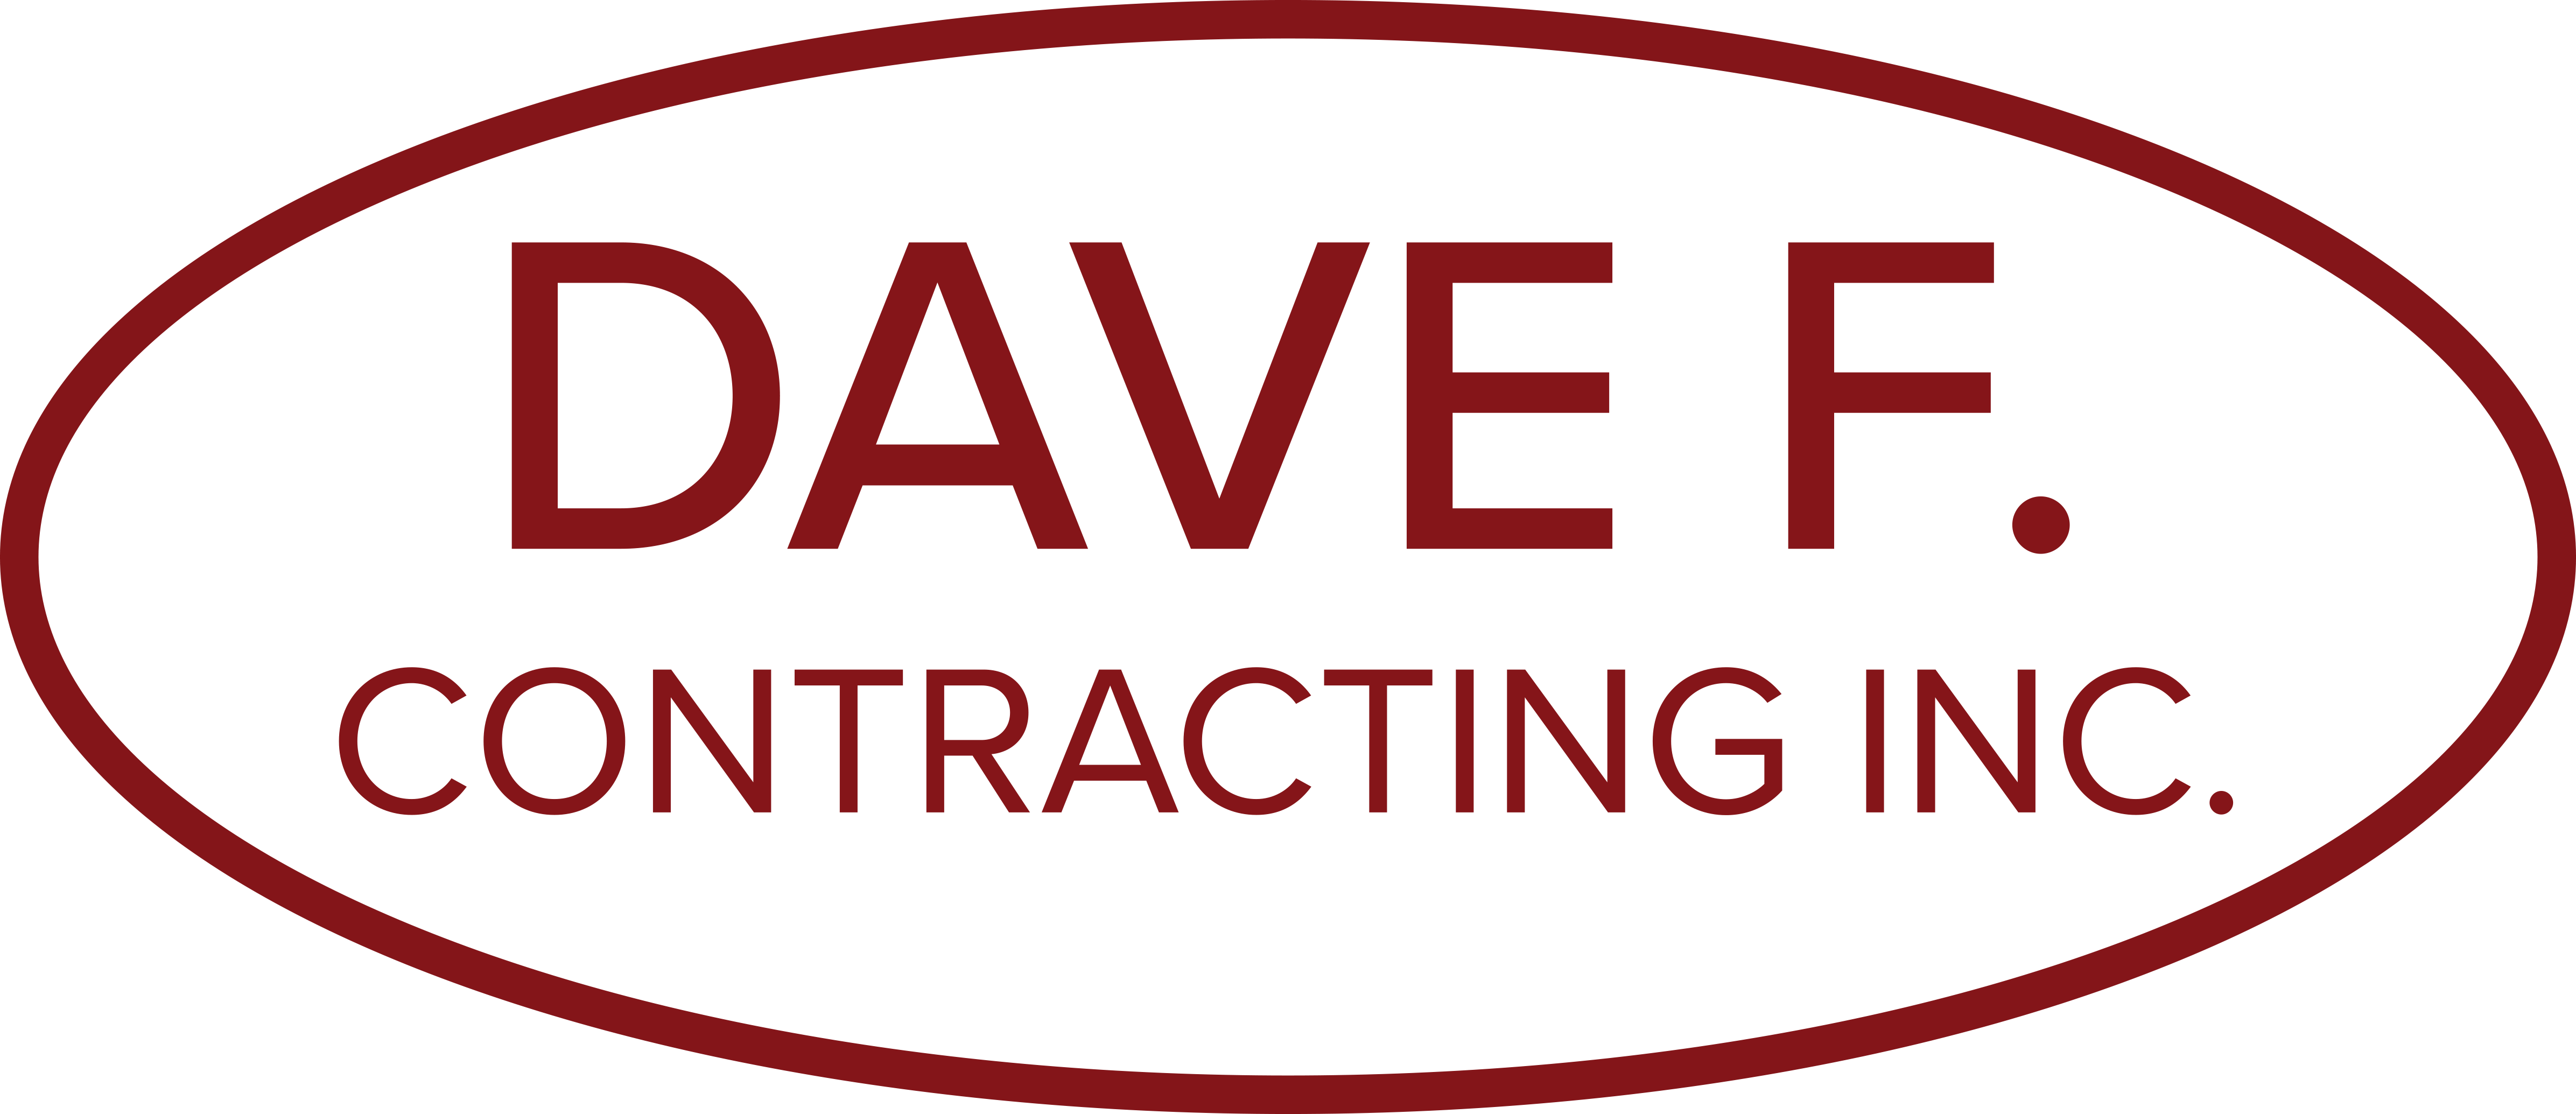 Dave F Contracting Inc.